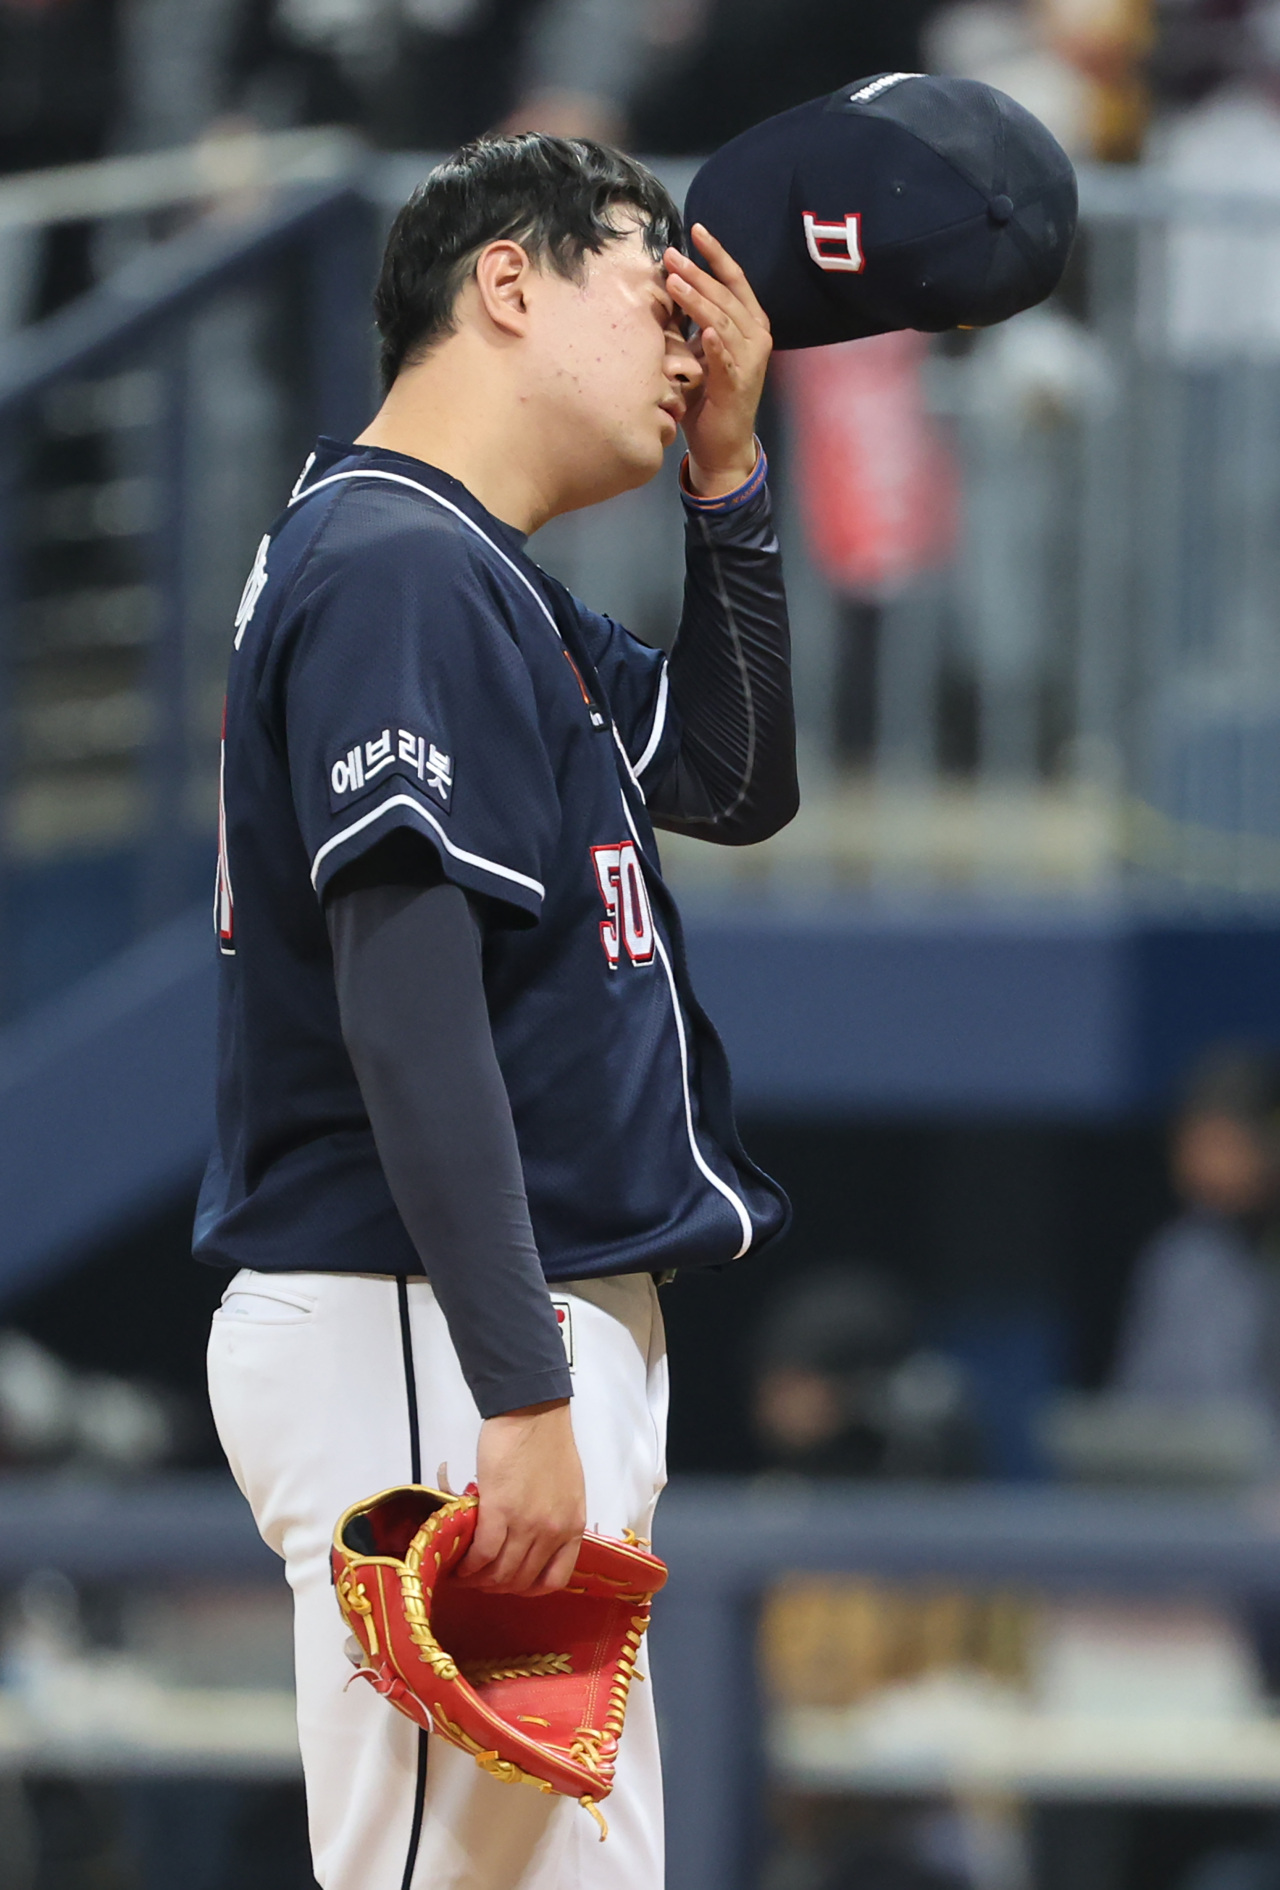 Doosan Bears' reliever Lee Young-ha reacts after giving up a run against the KT Wiz during the bottom of the seventh inning in Game 1 of the Korean Series at Gocheok Sky Dome in Seoul on Sunday. (Yonhap)